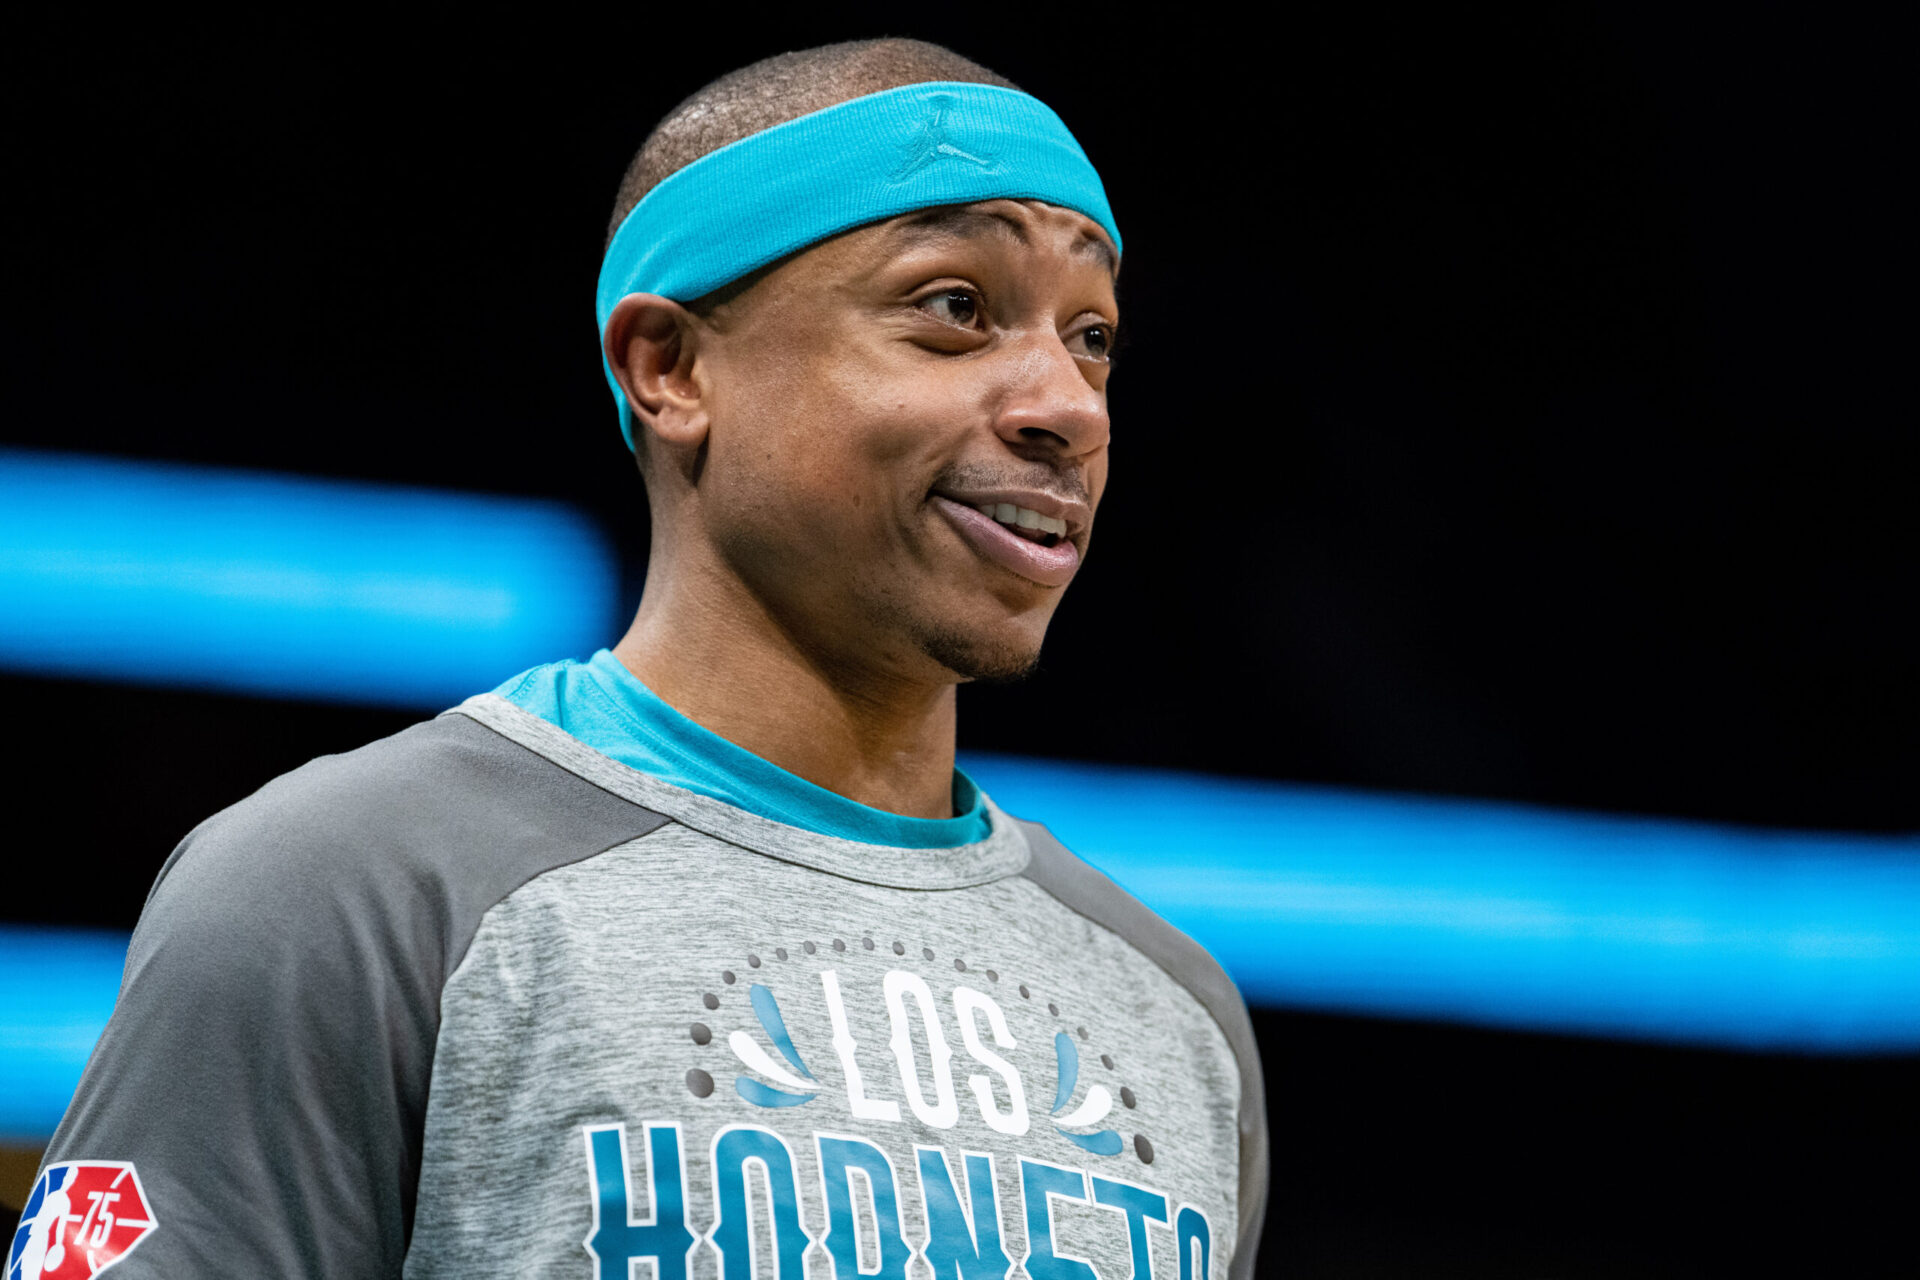 Isaiah Thomas tweeted then deleted that a kid pulled out an AK-47 and threatened to kill him before recognizing him in his hometown of Tacoma, Washington.